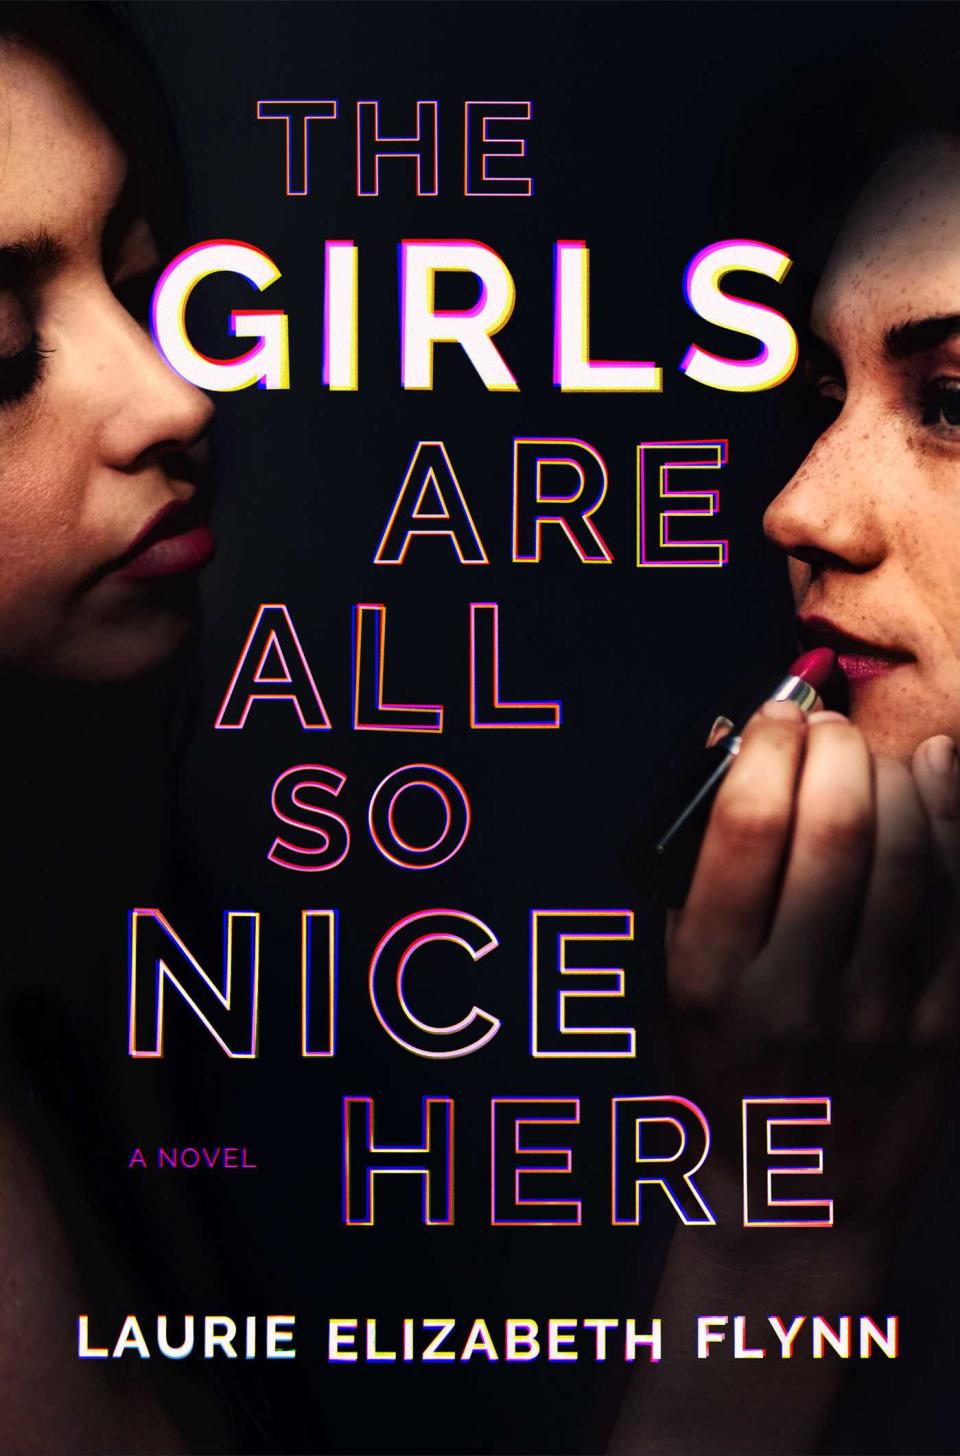 "The Girls Are All So nice Here" by Laurie Elizabeth Flynn